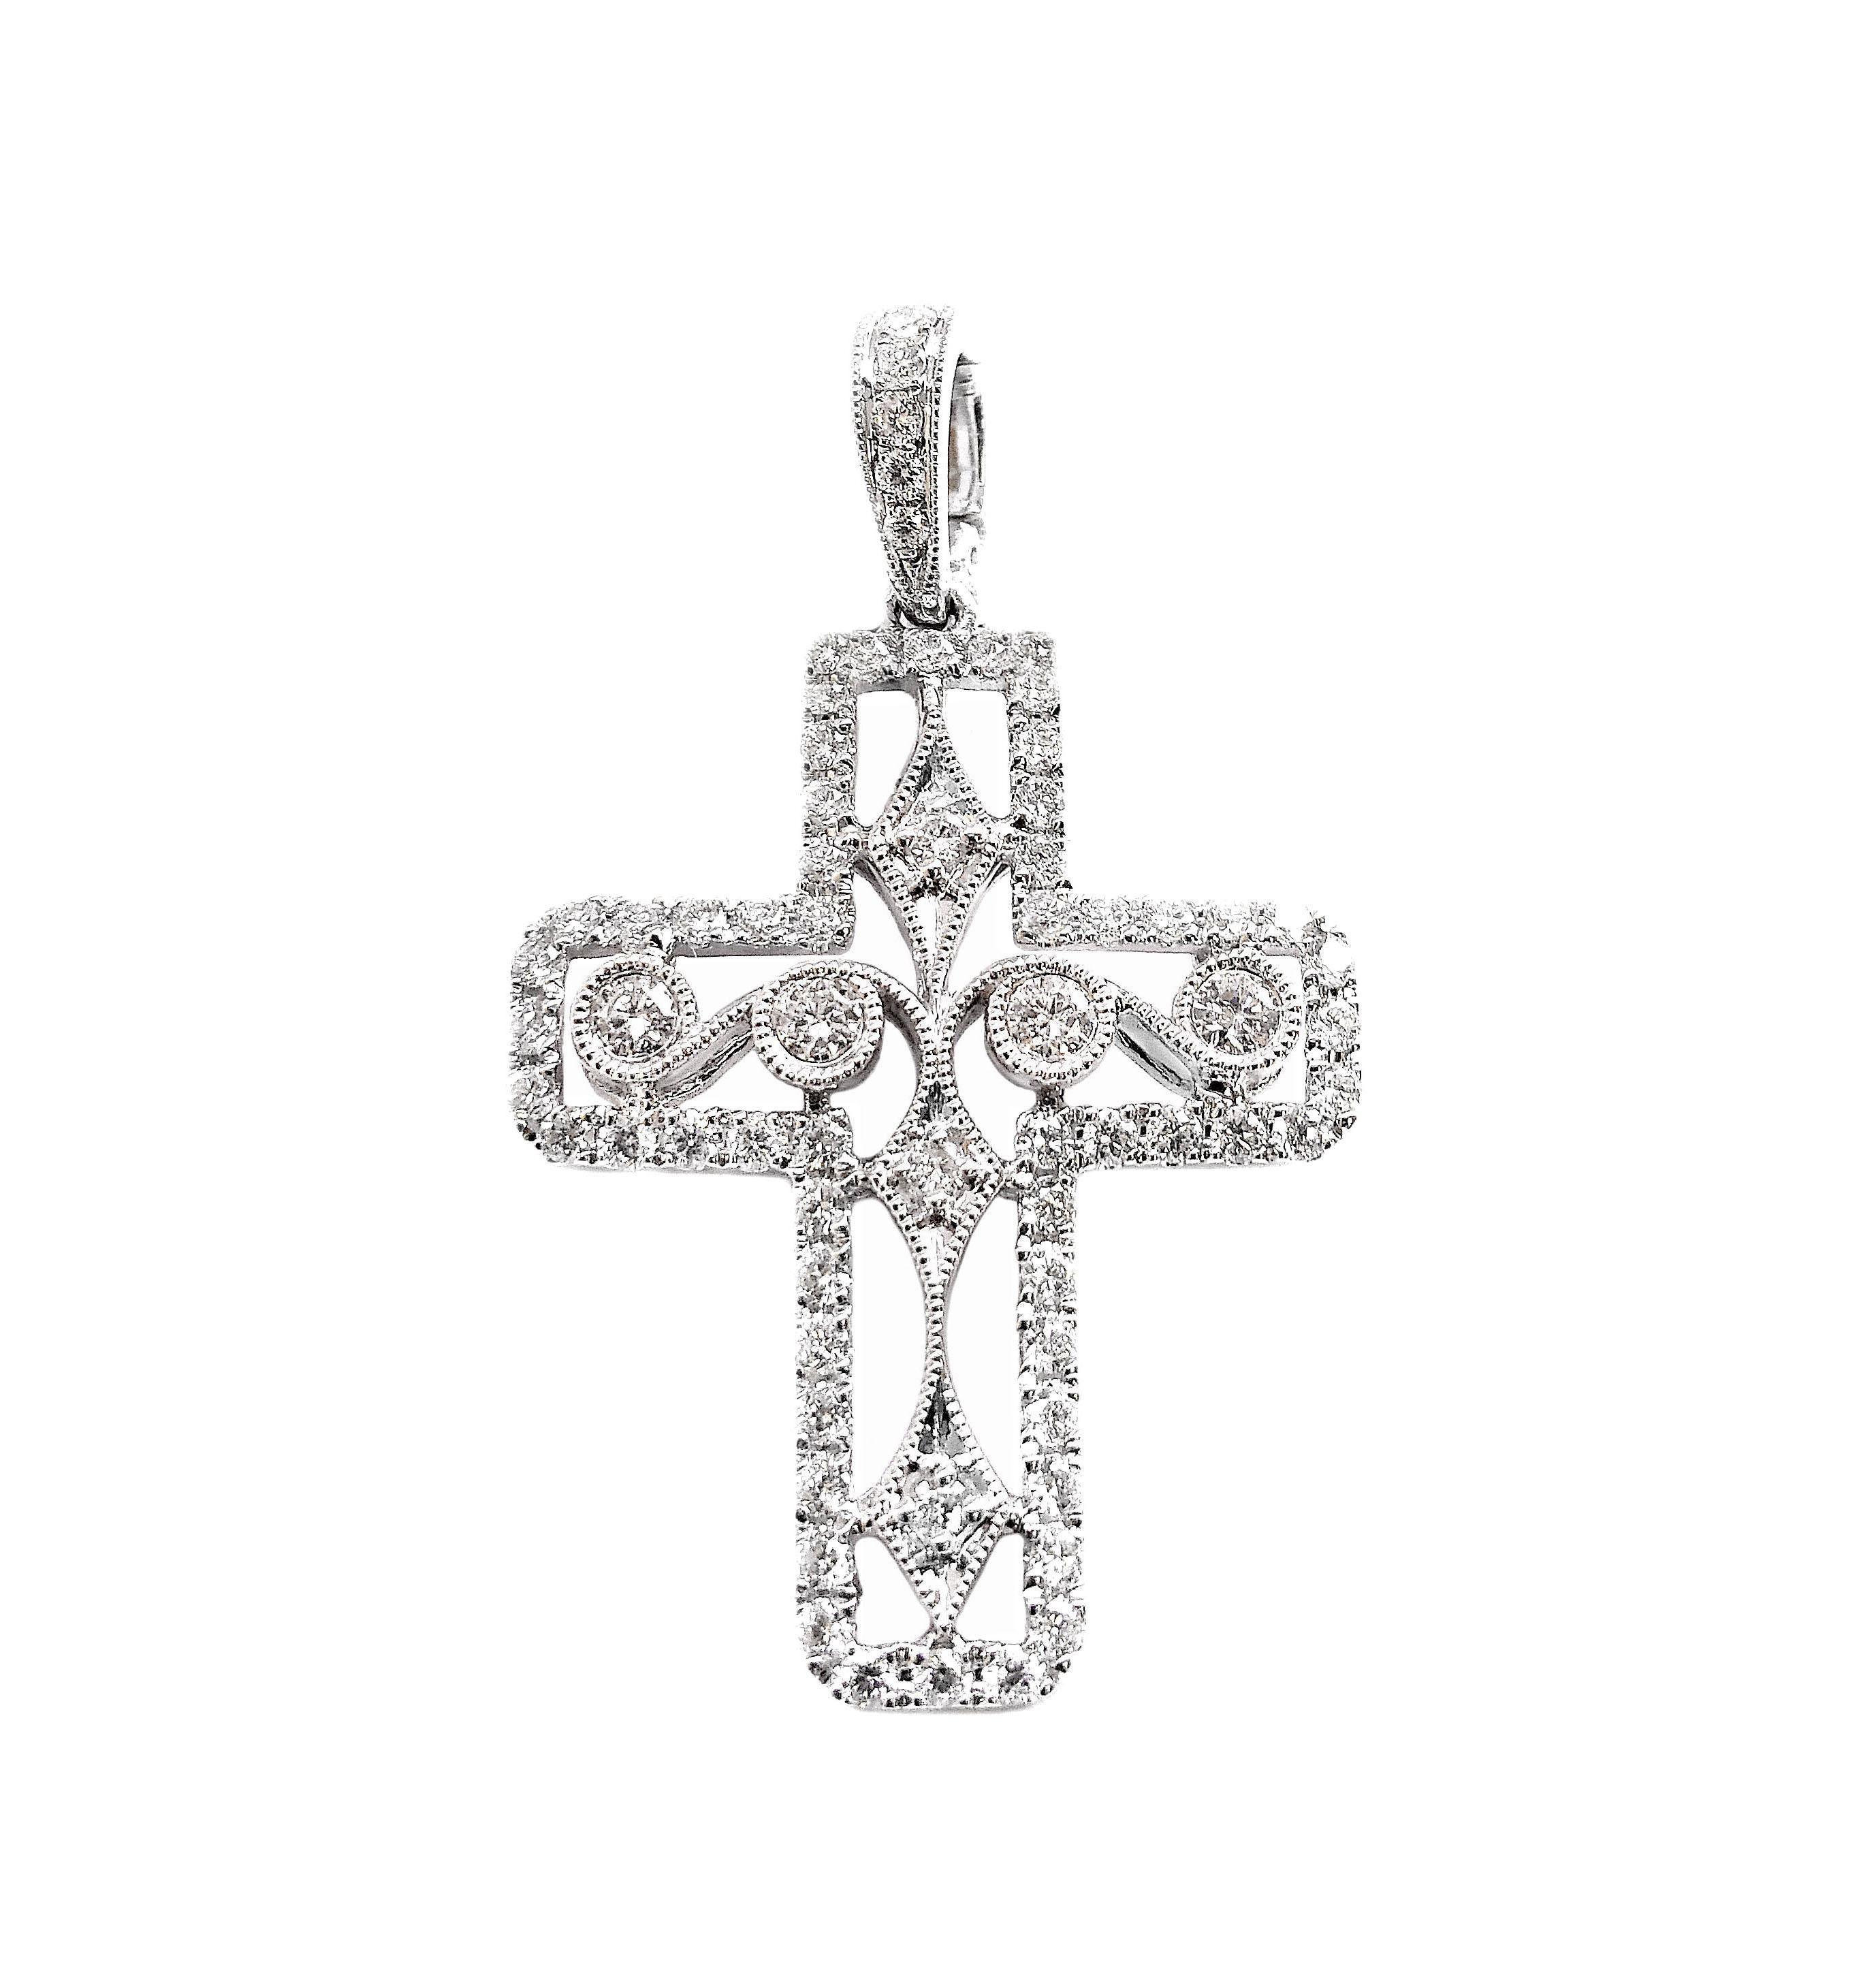 Produced by award winning Italian designer Stefano Vitolo. Stefano creates custom artisanal one of a kind jewelry with excellent gemstones in a truly old world Italian craftmanship.

Gemstones: Diamonds 0.60 ctw
Cross: 19 x 24 mm
Total Length: 32